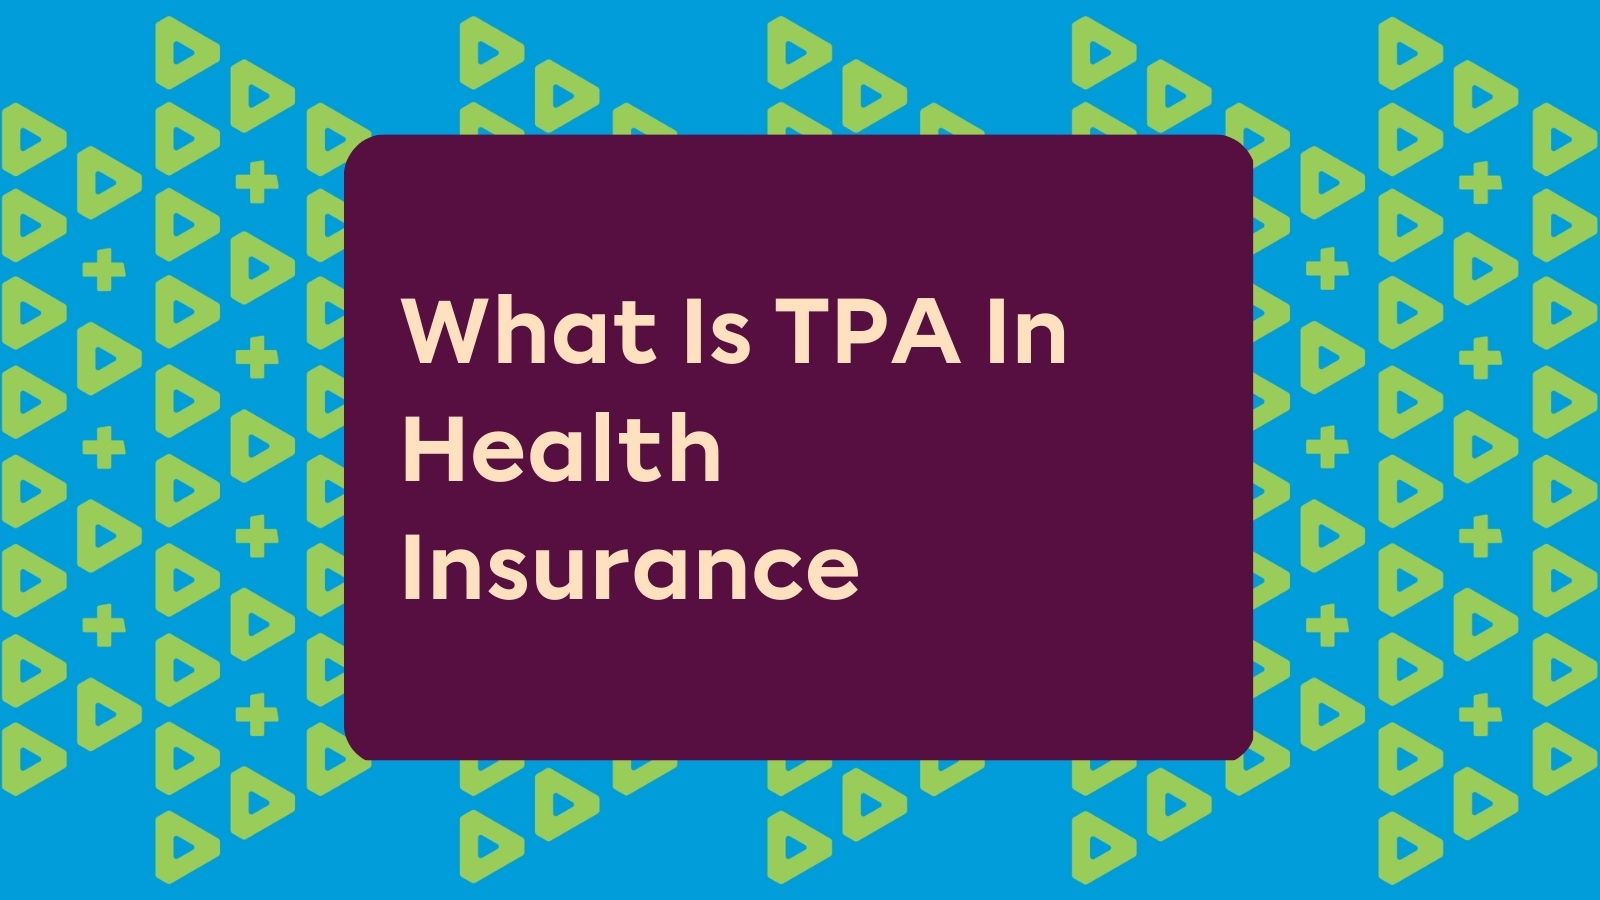 What Is TPA Insurance?